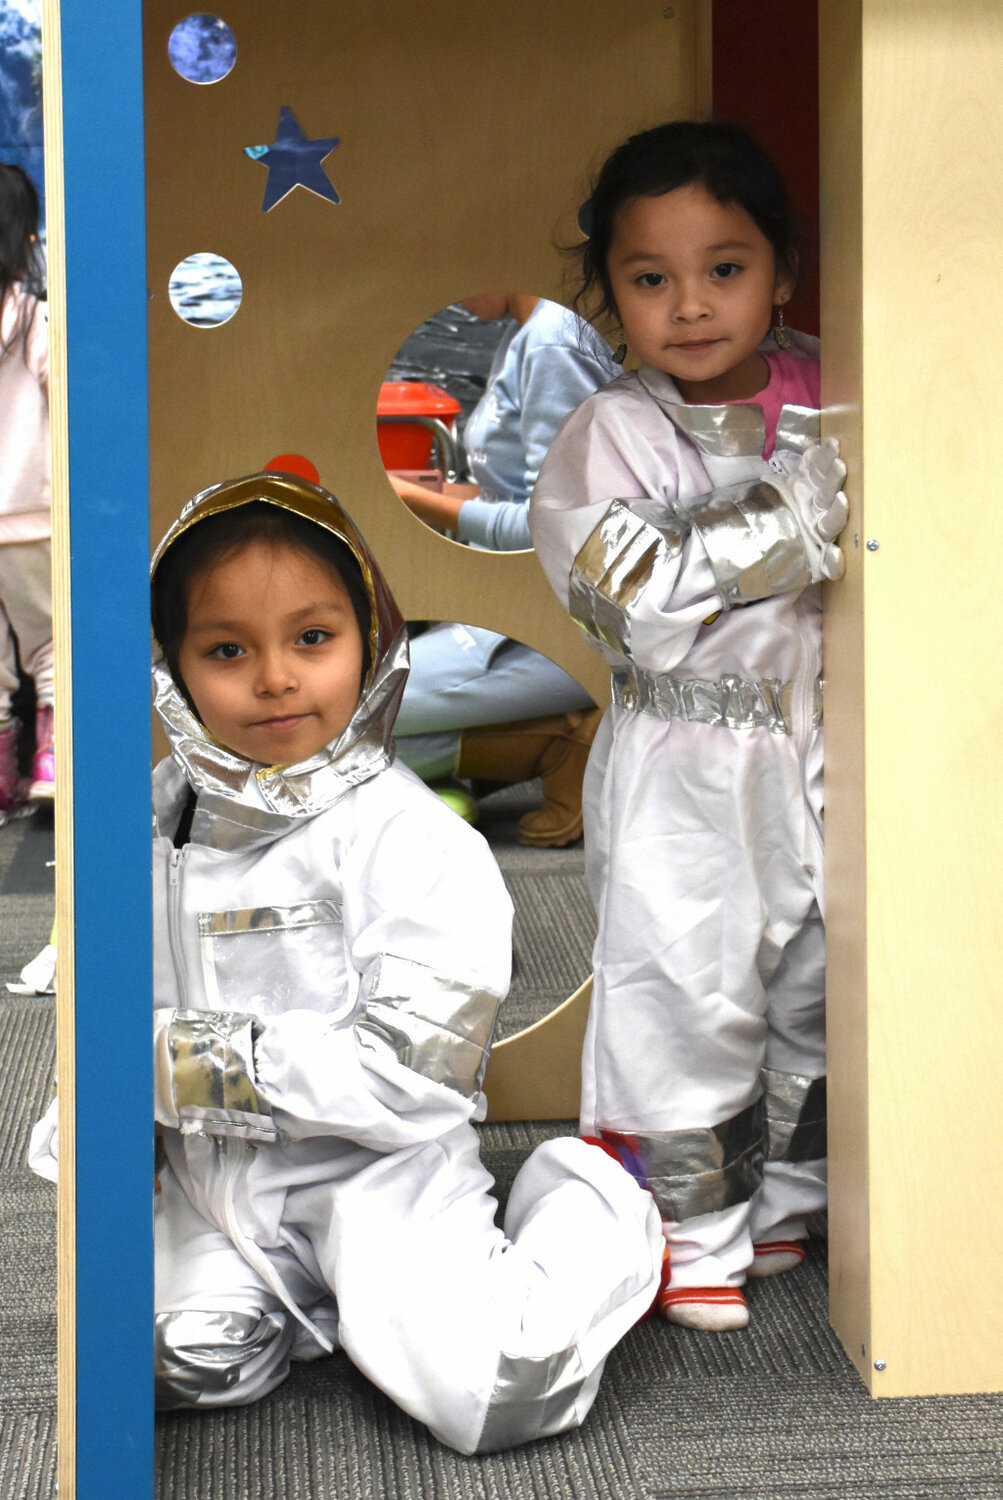 Robert Galbreath
Marielle and Valerie Romero transform into astronauts to explore the space station at the SCSD1 STEAM Room. The space station provides space for dramatic play, where children apply their imaginations to discover new places, boosting their curiosity, creativity and ability to work as a team.